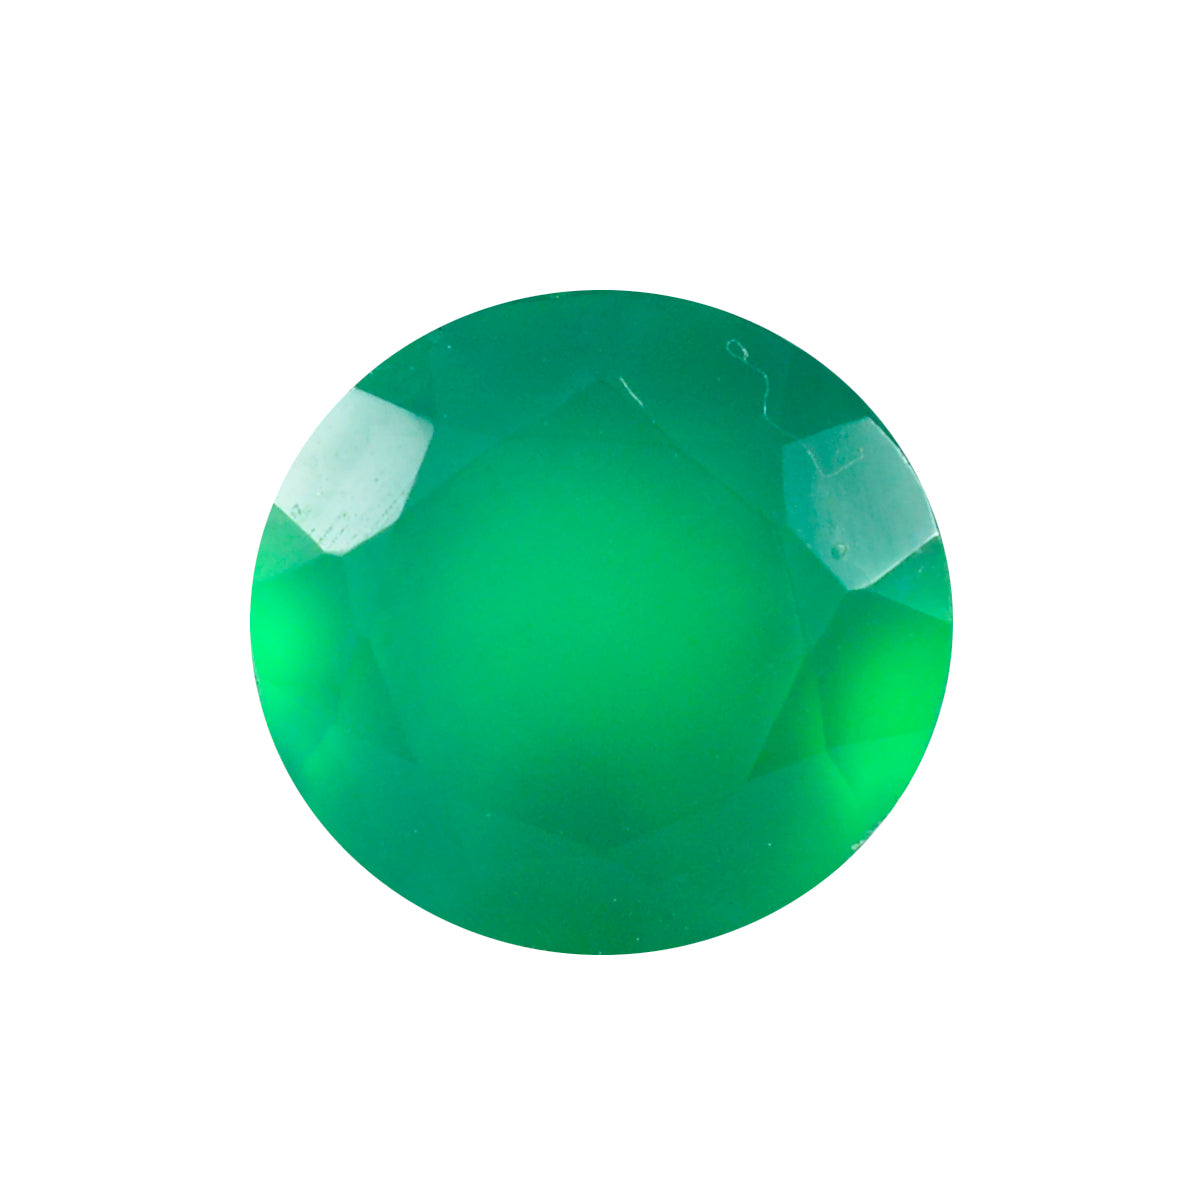 Riyogems 1PC Natural Green Onyx Faceted 11x11 mm Round Shape handsome Quality Loose Stone